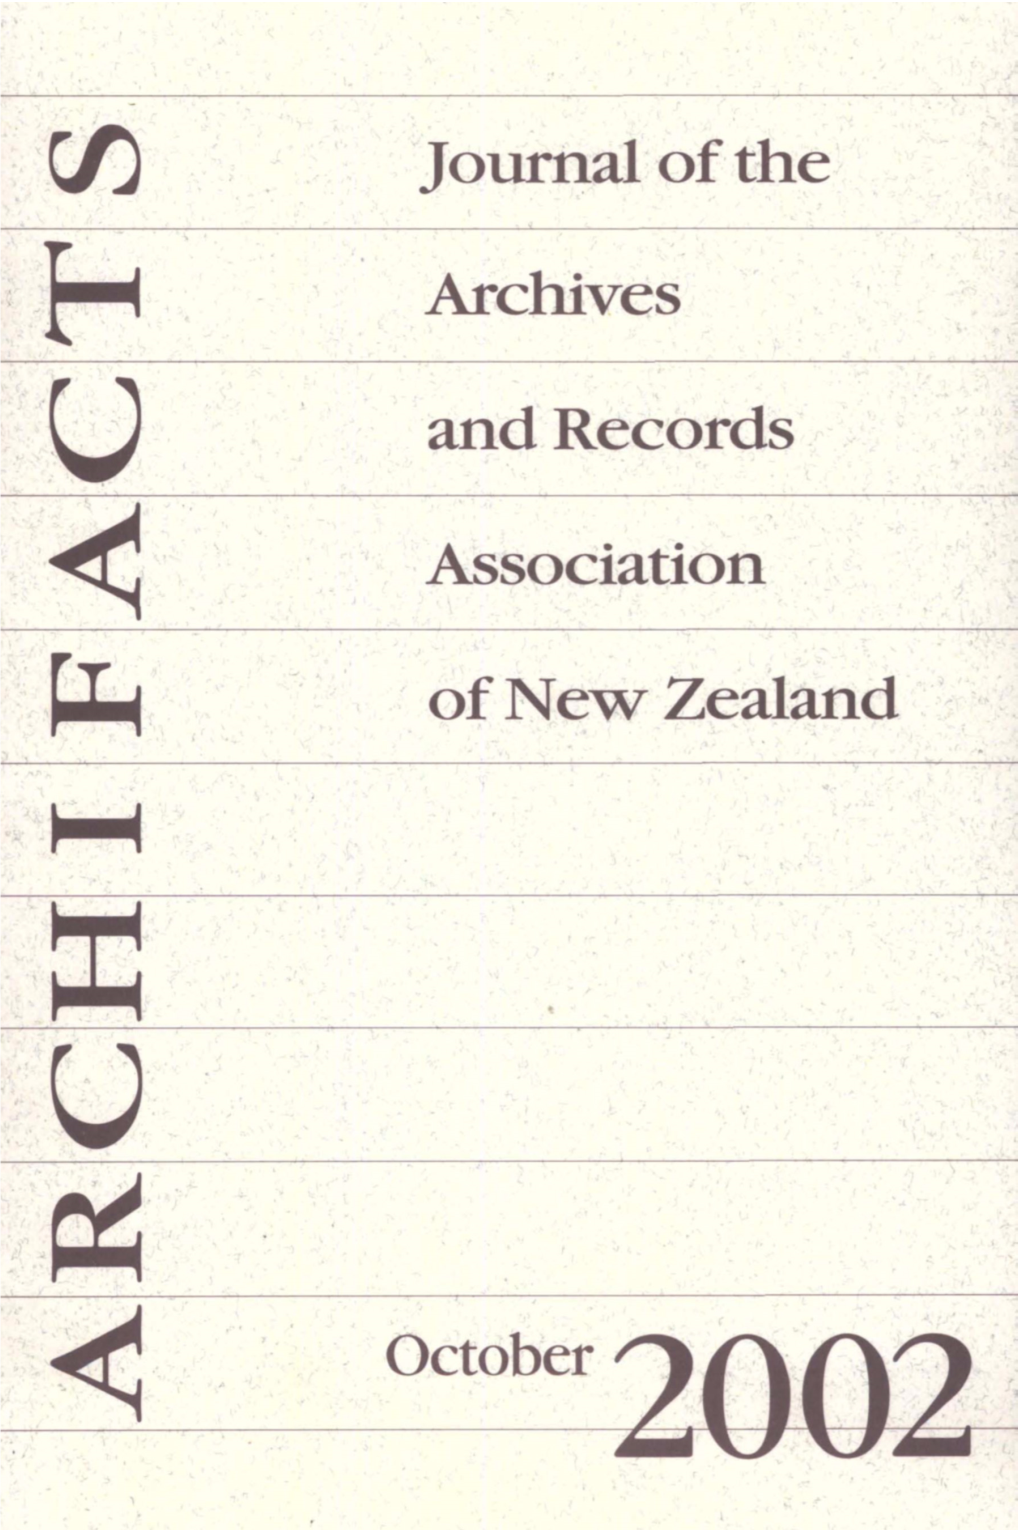 Archifacts October 2002